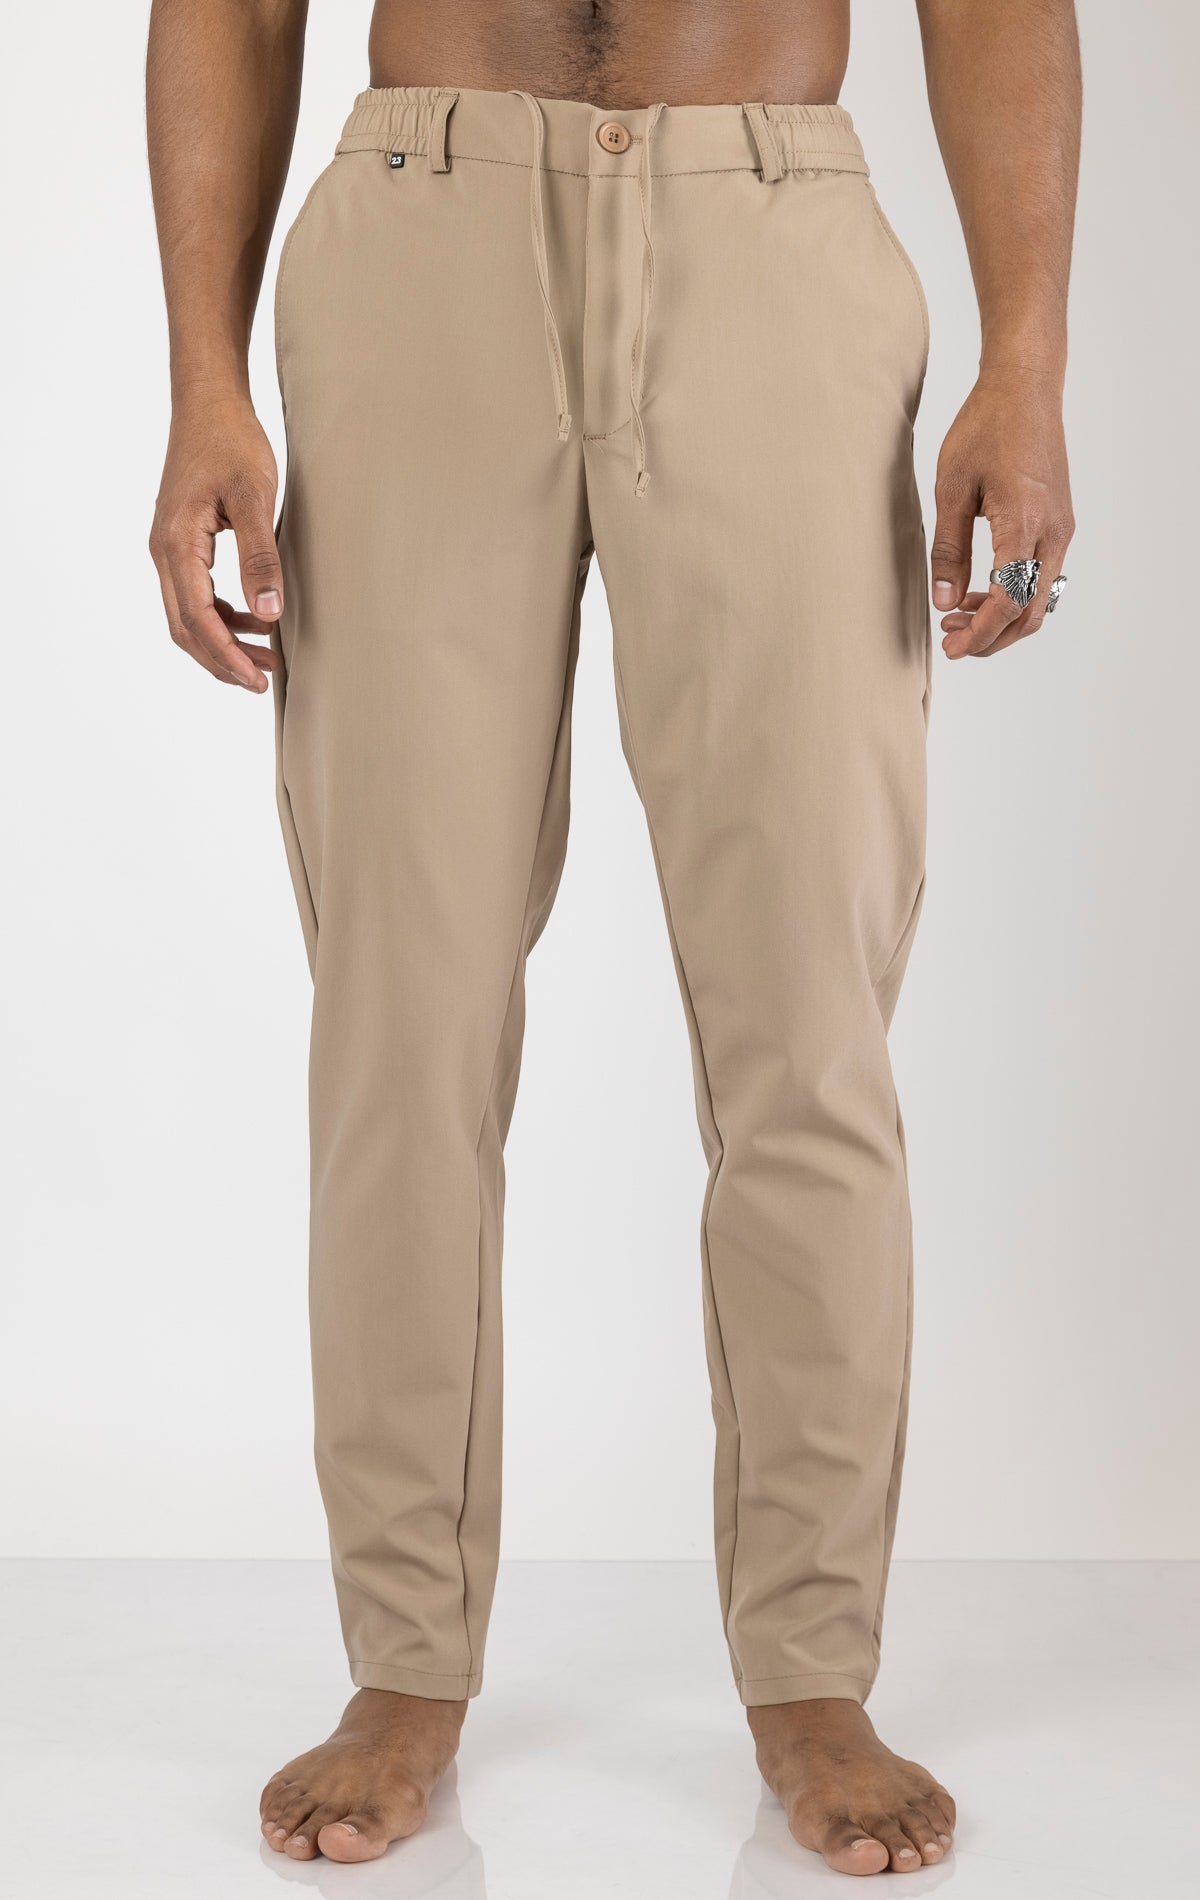 Men's wrinkle-free tapered travel pants in camel color. The pants are made from a blend of polyamide (88%) and elastane (12%) and feature a tapered fit, wrinkle-resistant fabric, and multiple pockets.